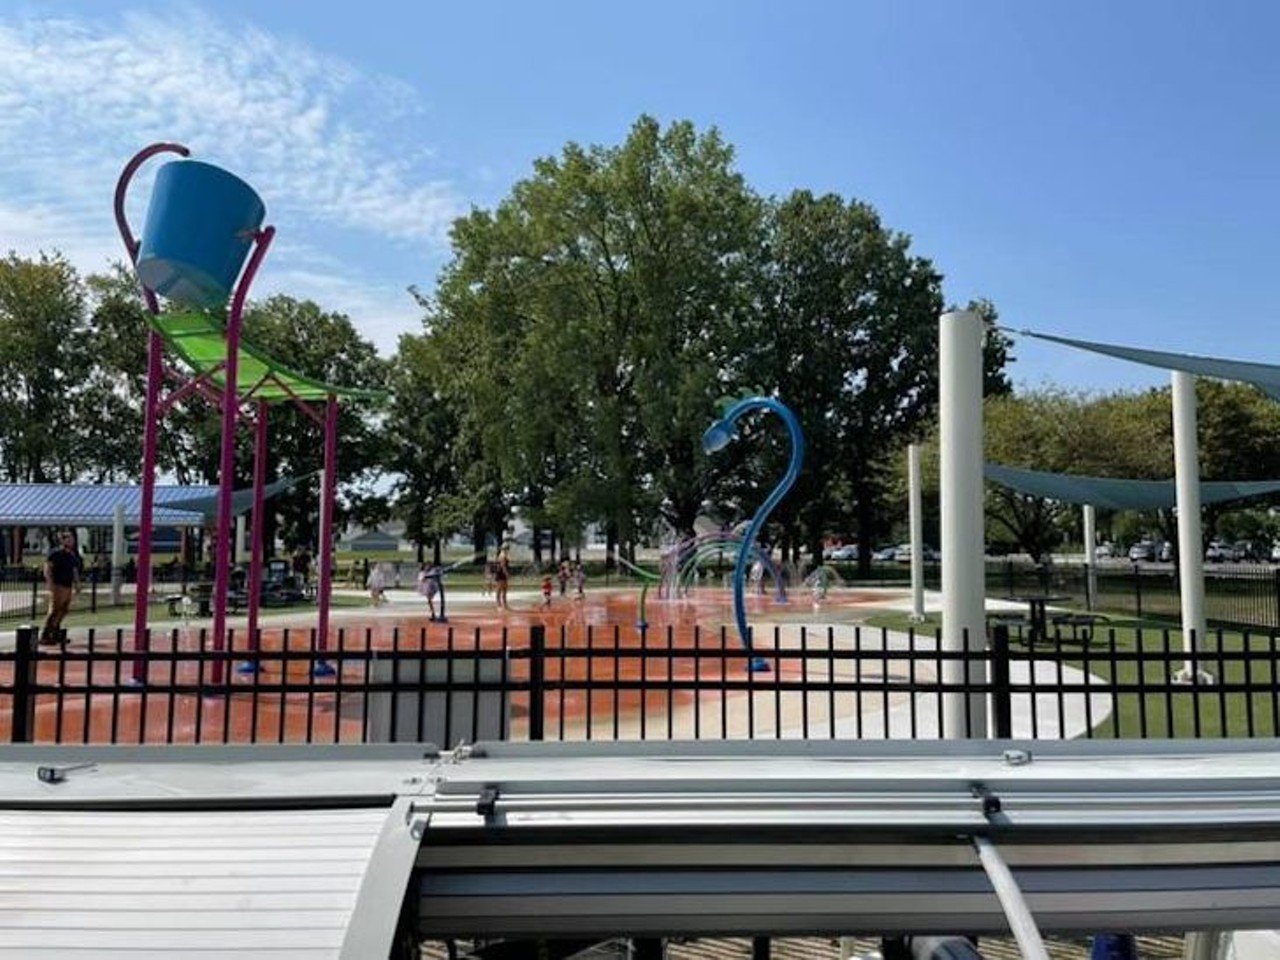 Normandy Oaks Park Splash Pad
4234 Delemere Blvd., Royal Oak
Royal Oak&#146;s Normandy Oaks Park Splash Pad not only features the water playground, but also a playscape nearby for some dry fun as well.